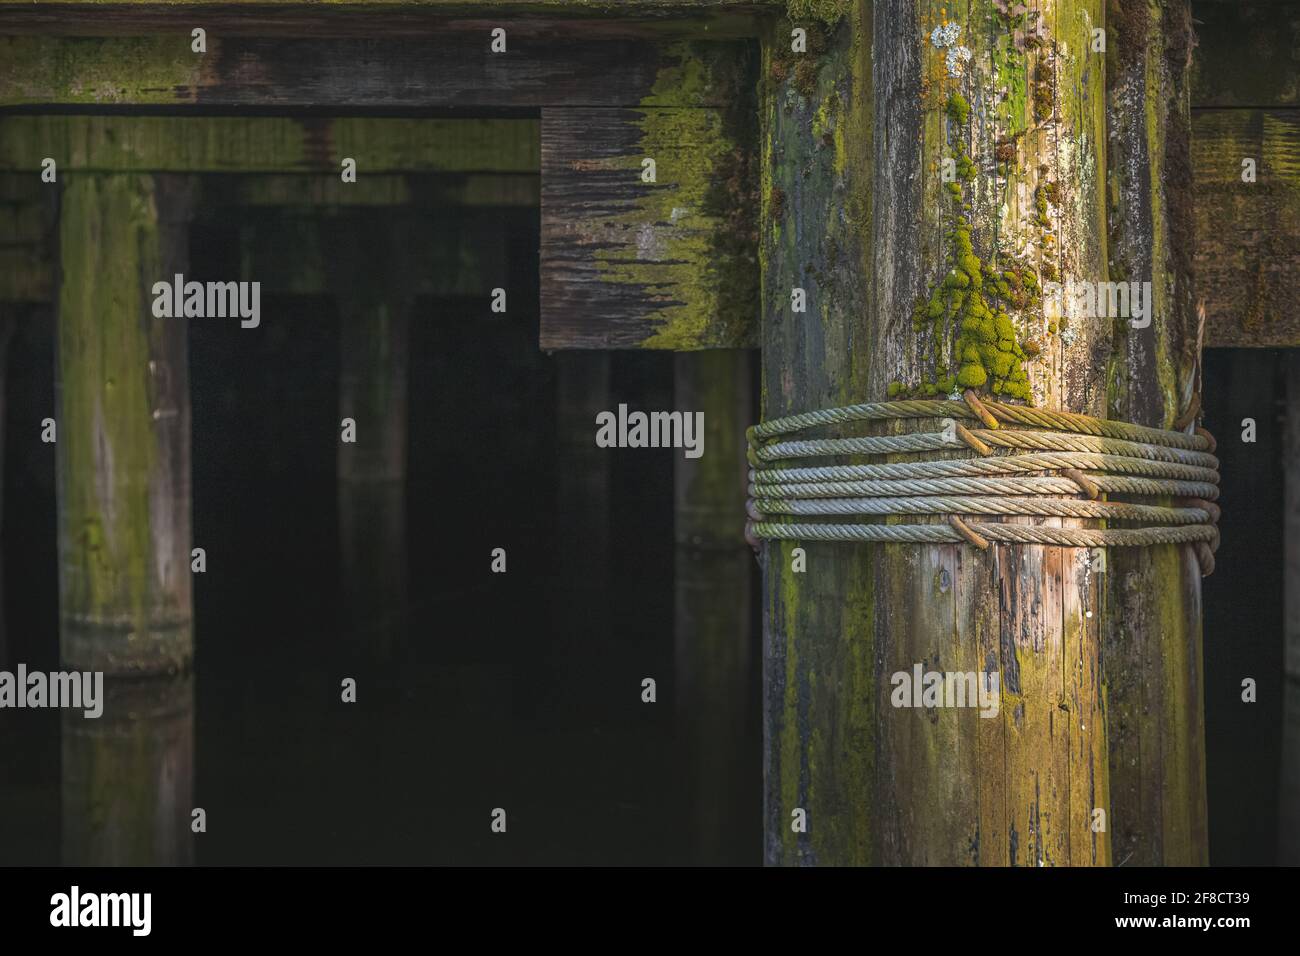 Close-up detail of decay, texture and green algae on nautical wood pilings underneath a seaside pier or dock. Stock Photo